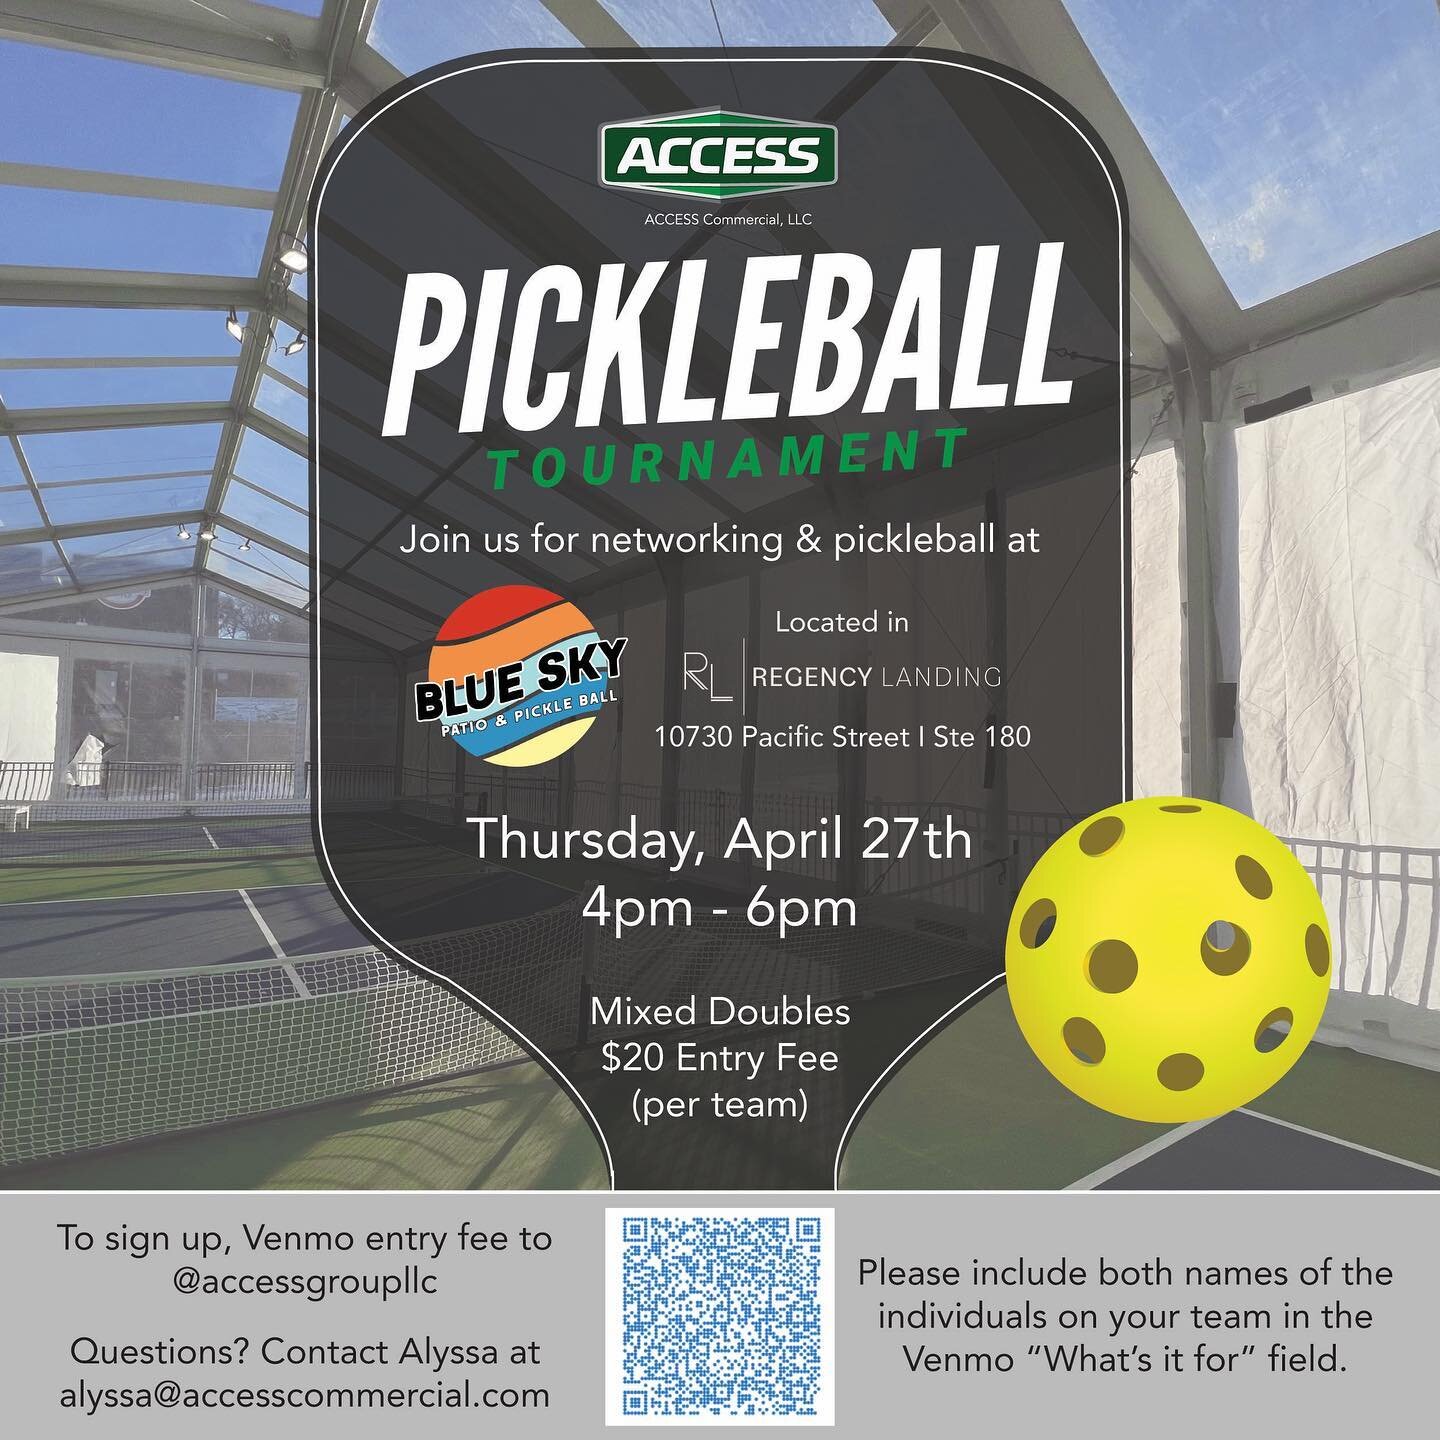 ACCESS Commercial is hosting an awesome networking event TOMORROW at Blue Sky Patio &amp; Pickleball. Open to Brokers, Commercial Real Estate Professionals, or anyone that wants to network with other Omaha Professionals. Sign up for the pickleball to